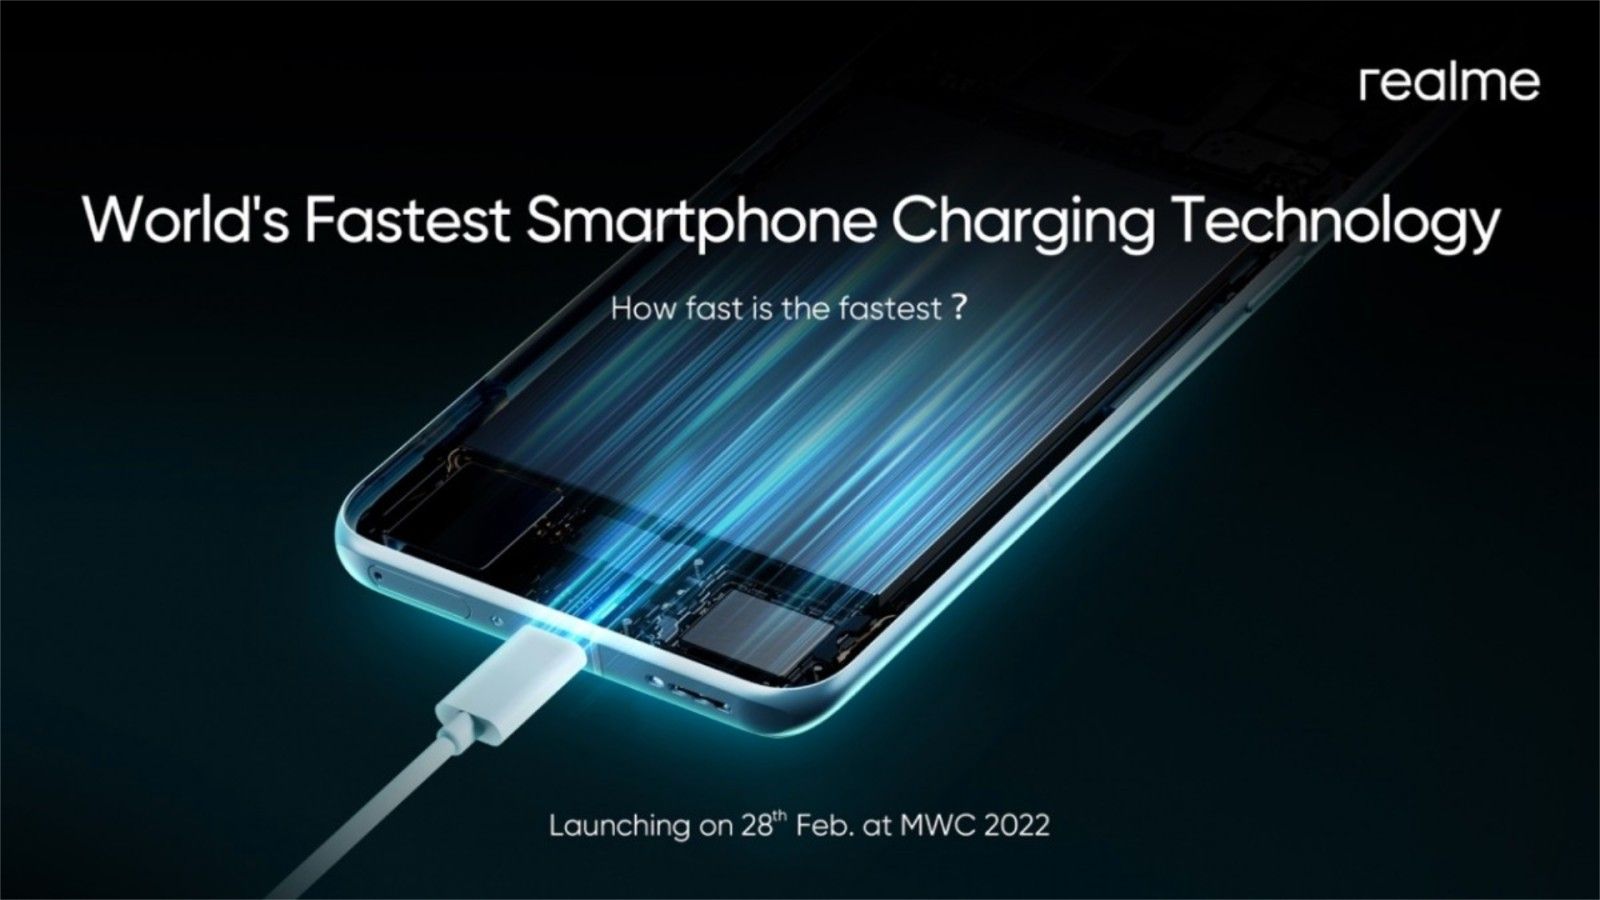 Realme 200W fast charger coming at MWC 2022